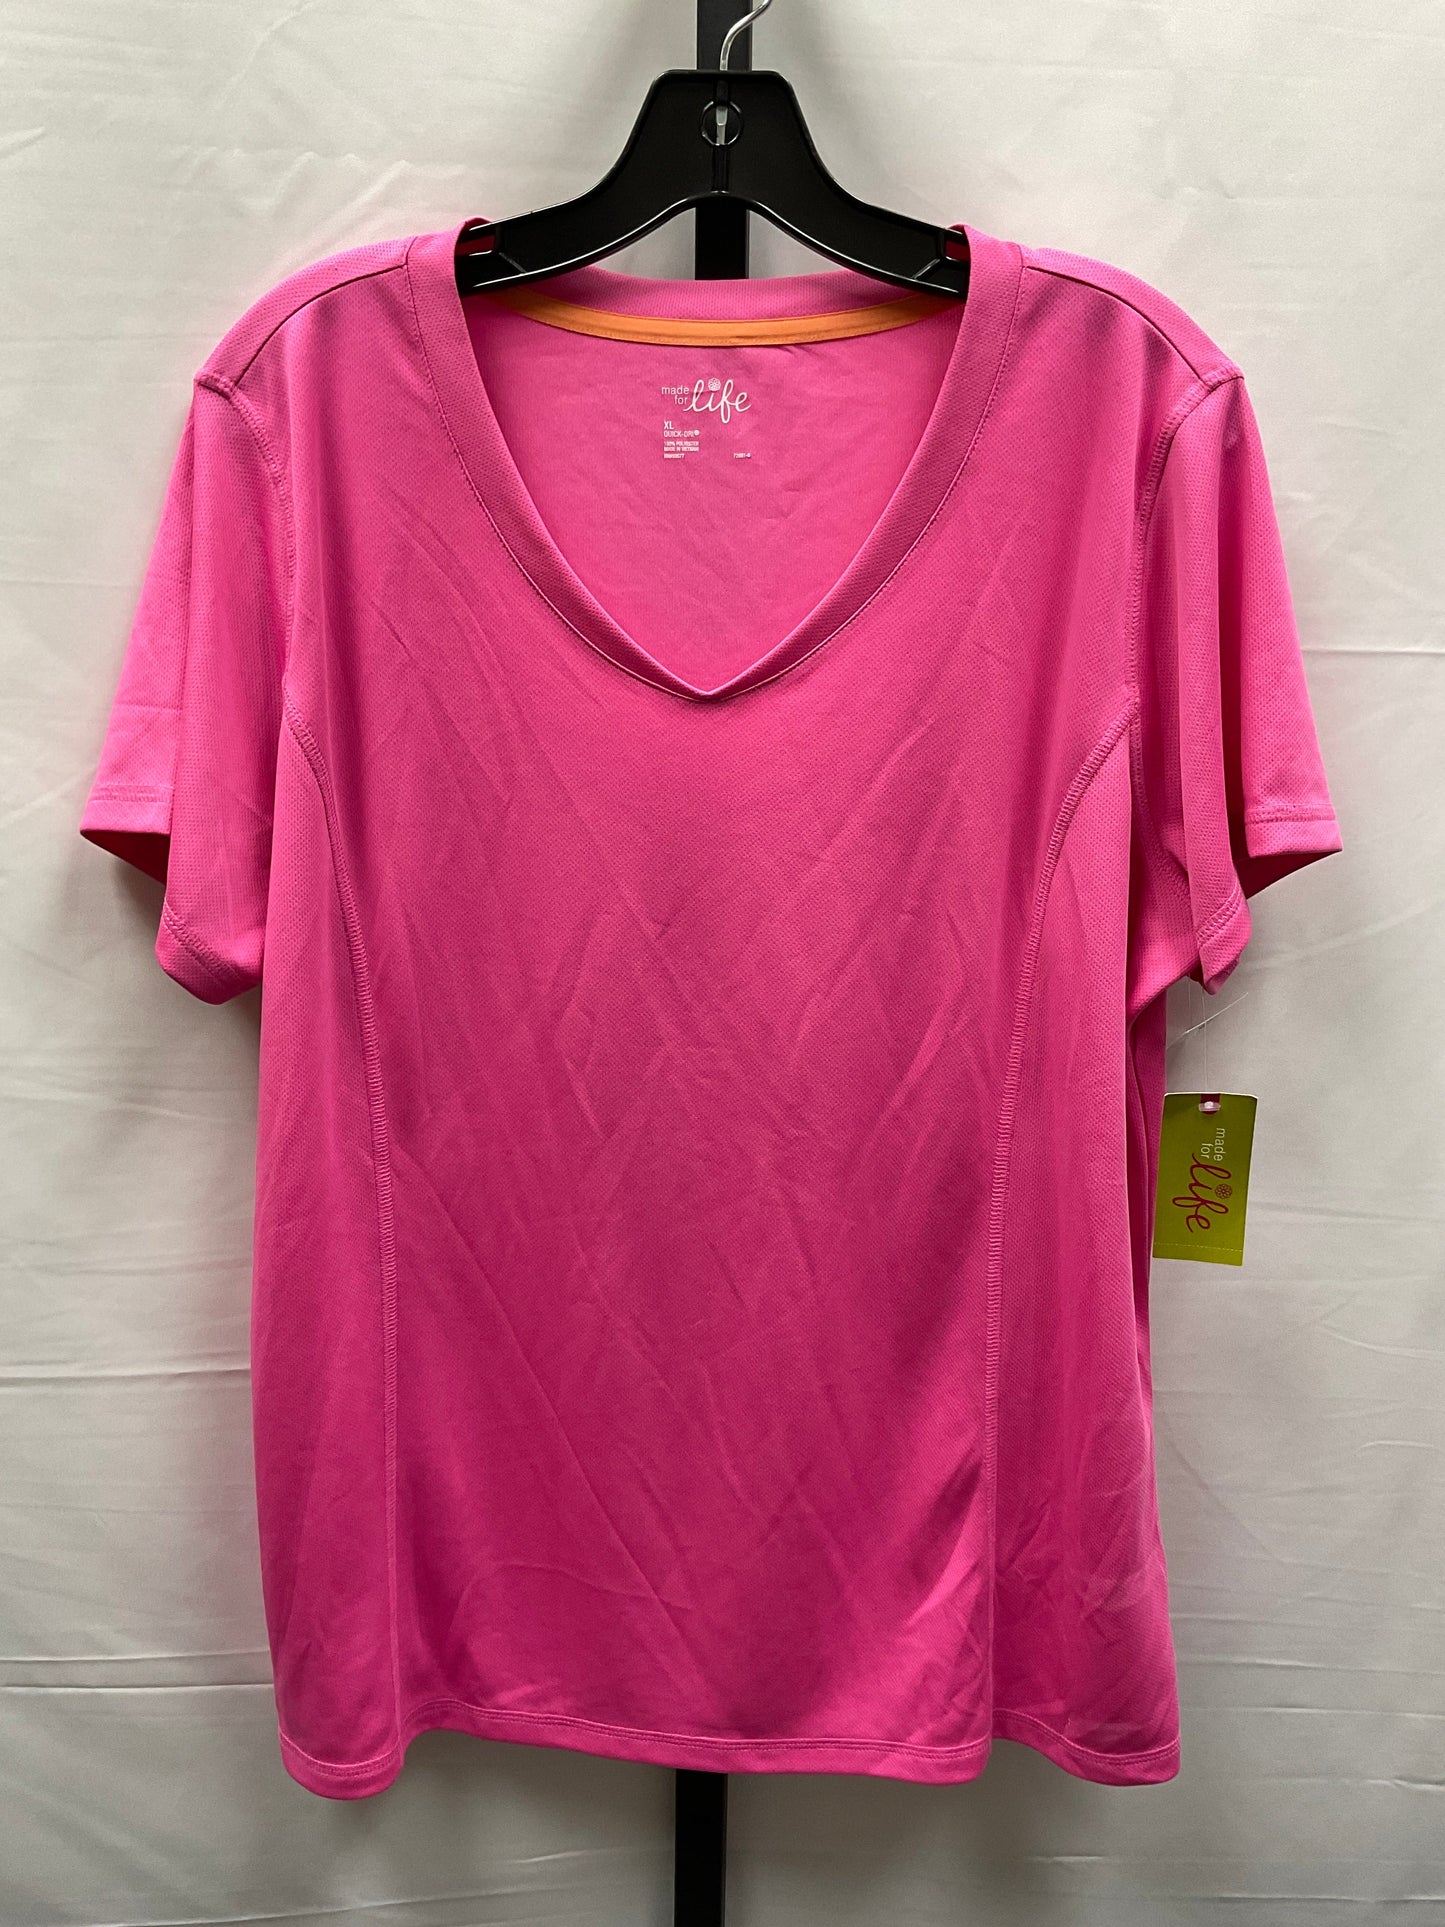 Pink Athletic Top Short Sleeve Made For Life, Size Xl